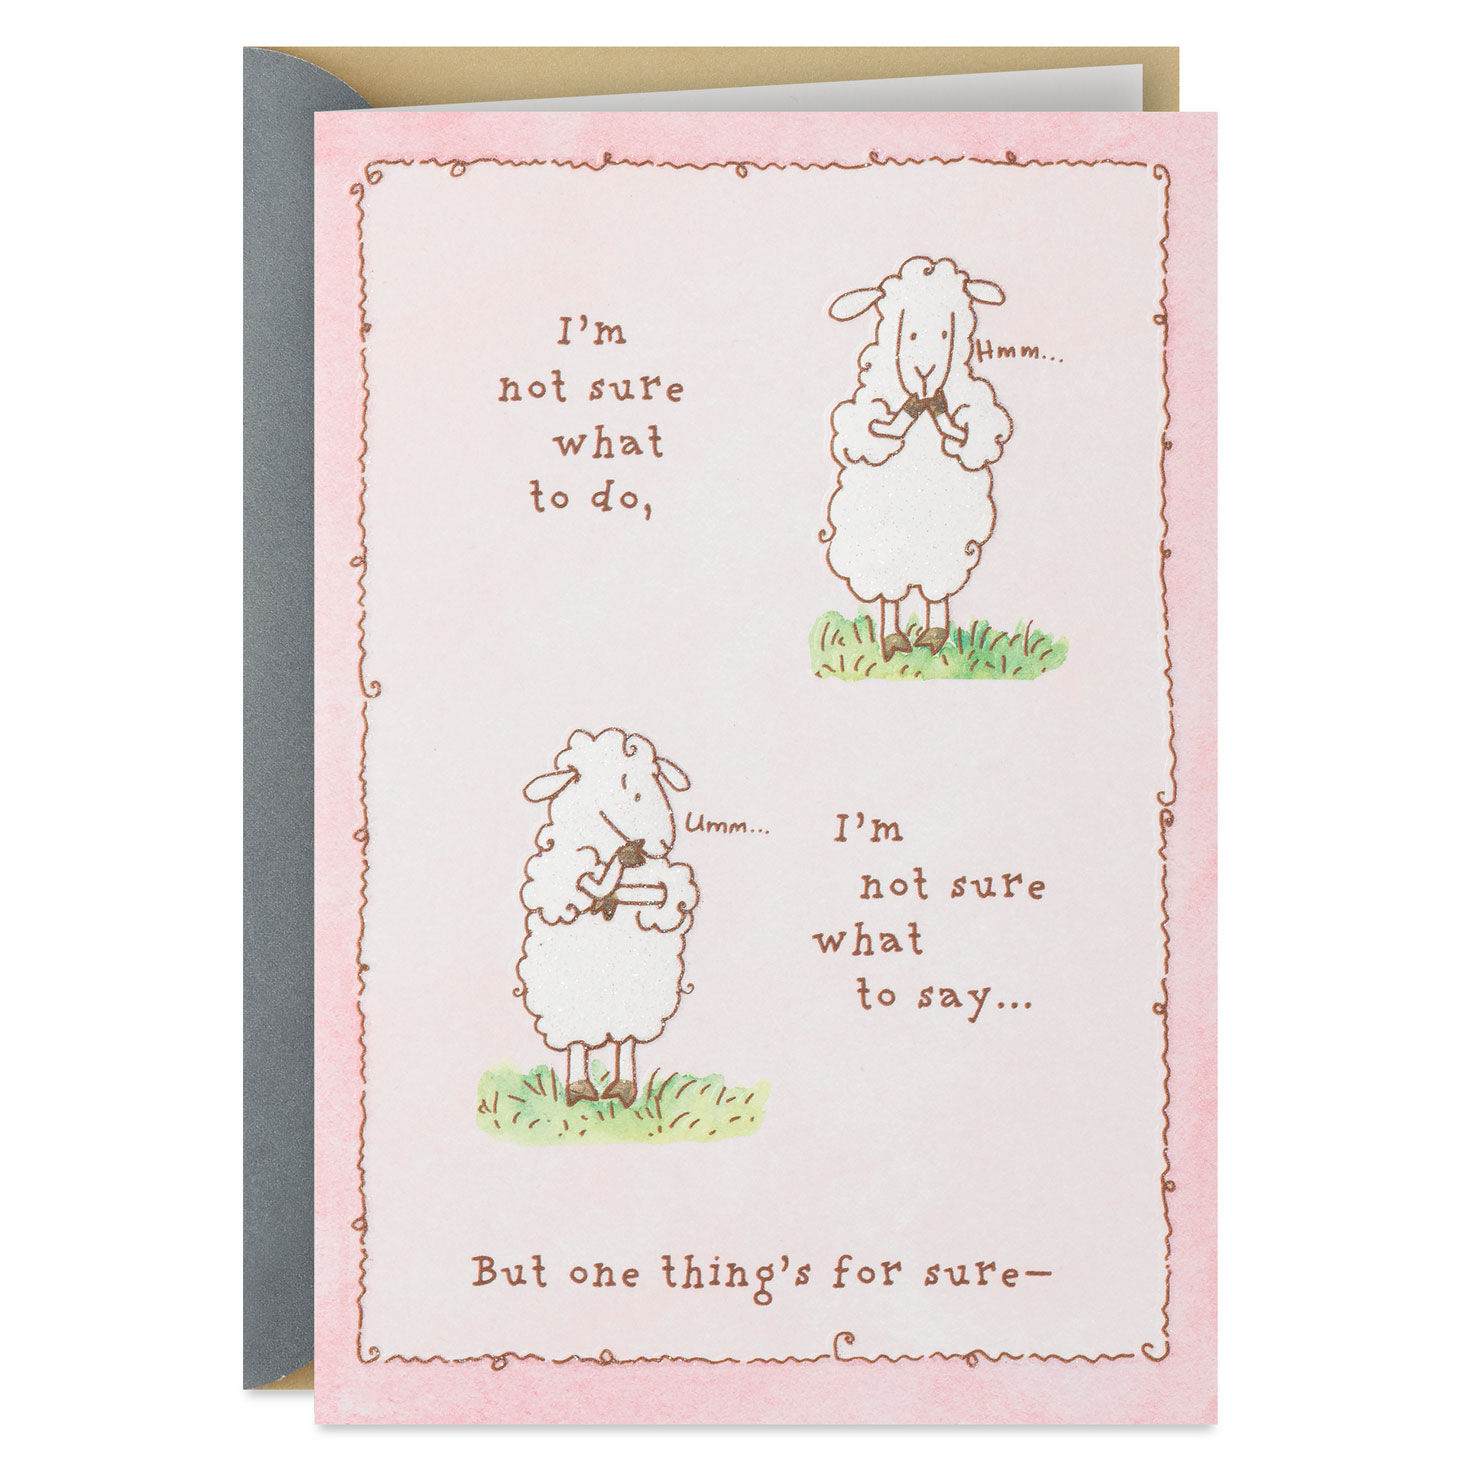 I Promise to Pray Encouragement Card for only USD 2.99 | Hallmark